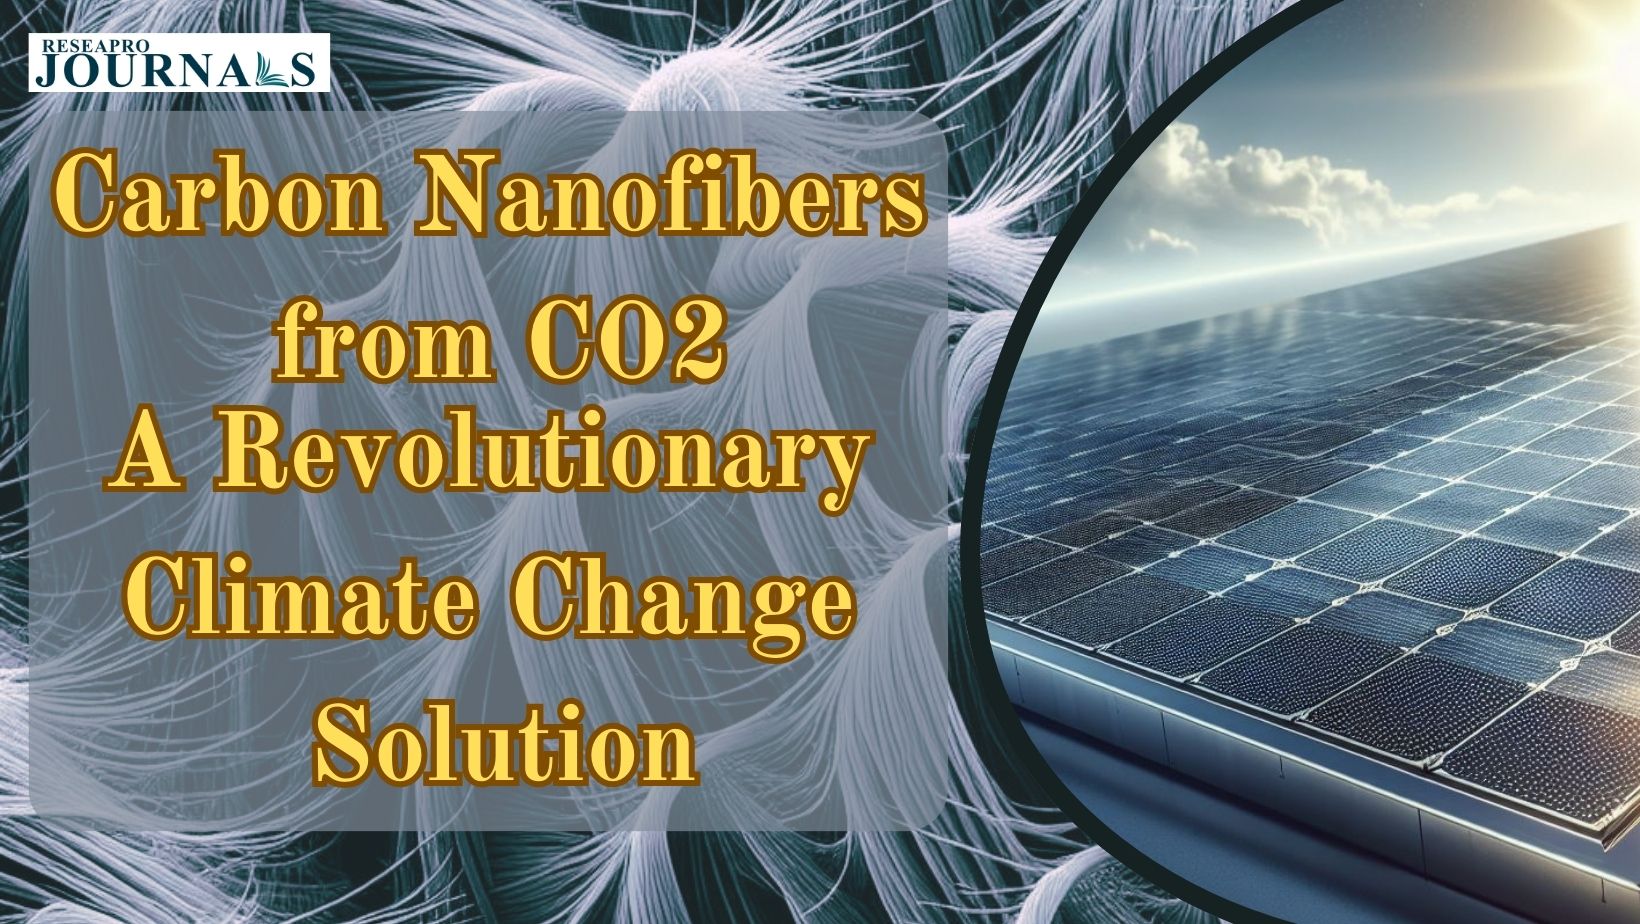 Carbon Nanofibers from CO2: A Revolutionary Climate Change Solution